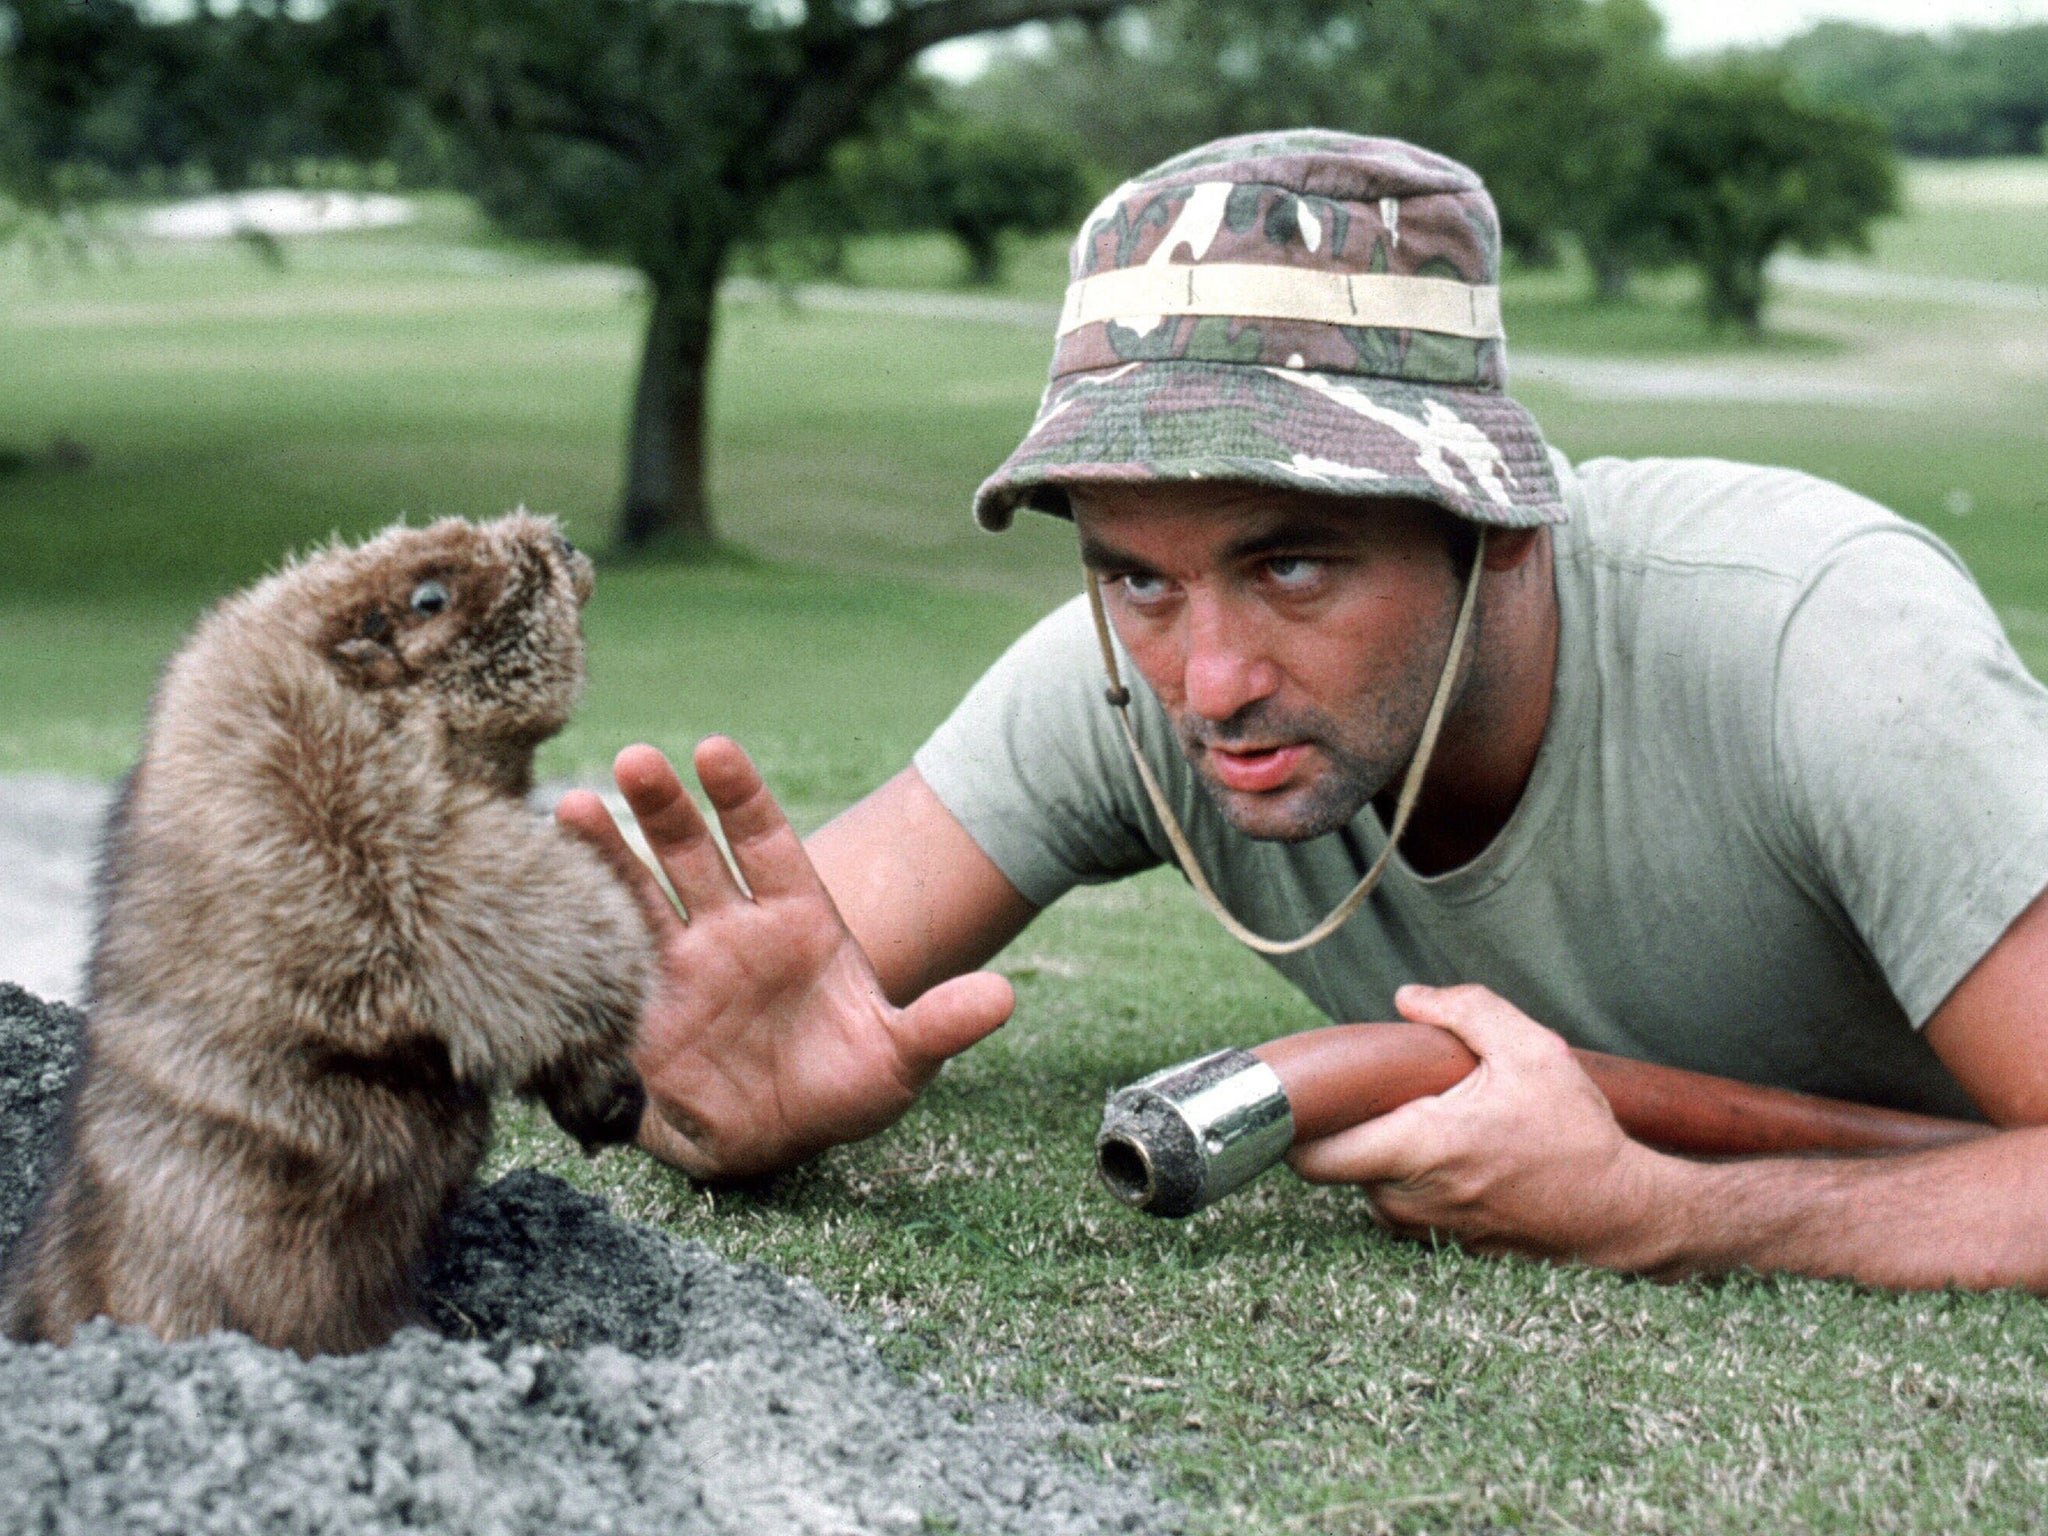 Murray faces off against a gopher in 'Caddyshack'